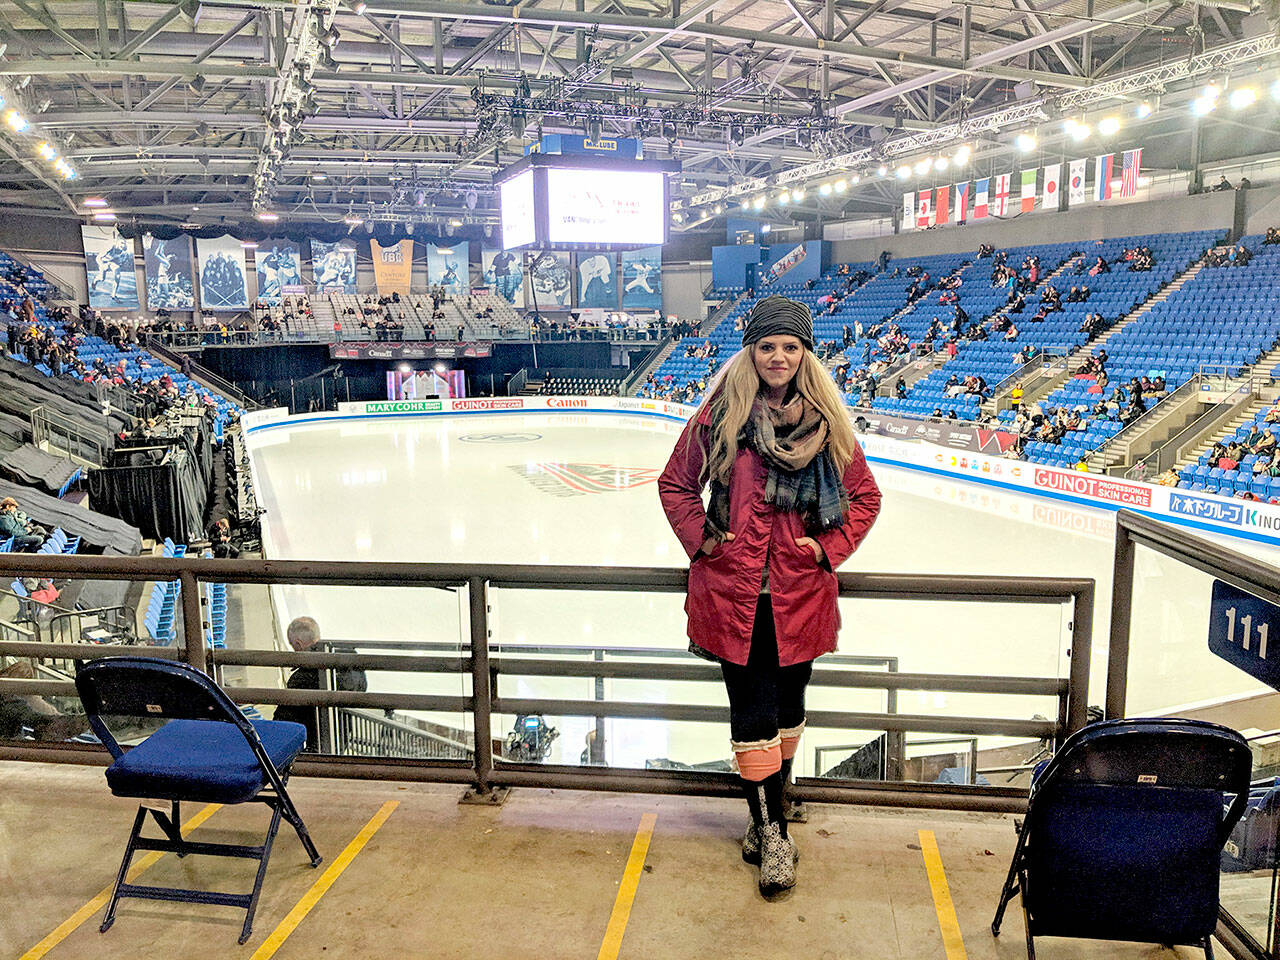 Jennifer Thomas, a Sequim composer, stands for a photo in Vancouver, B.C., during the 2018-19 Grand Prix Finals, where she saw Rika Kihira of Japan skate to a first-place finish. Kihira uses Thomas’ song “A Beautiful Storm” in her free skate routine. (Photo courtesy of Jennifer Thomas)